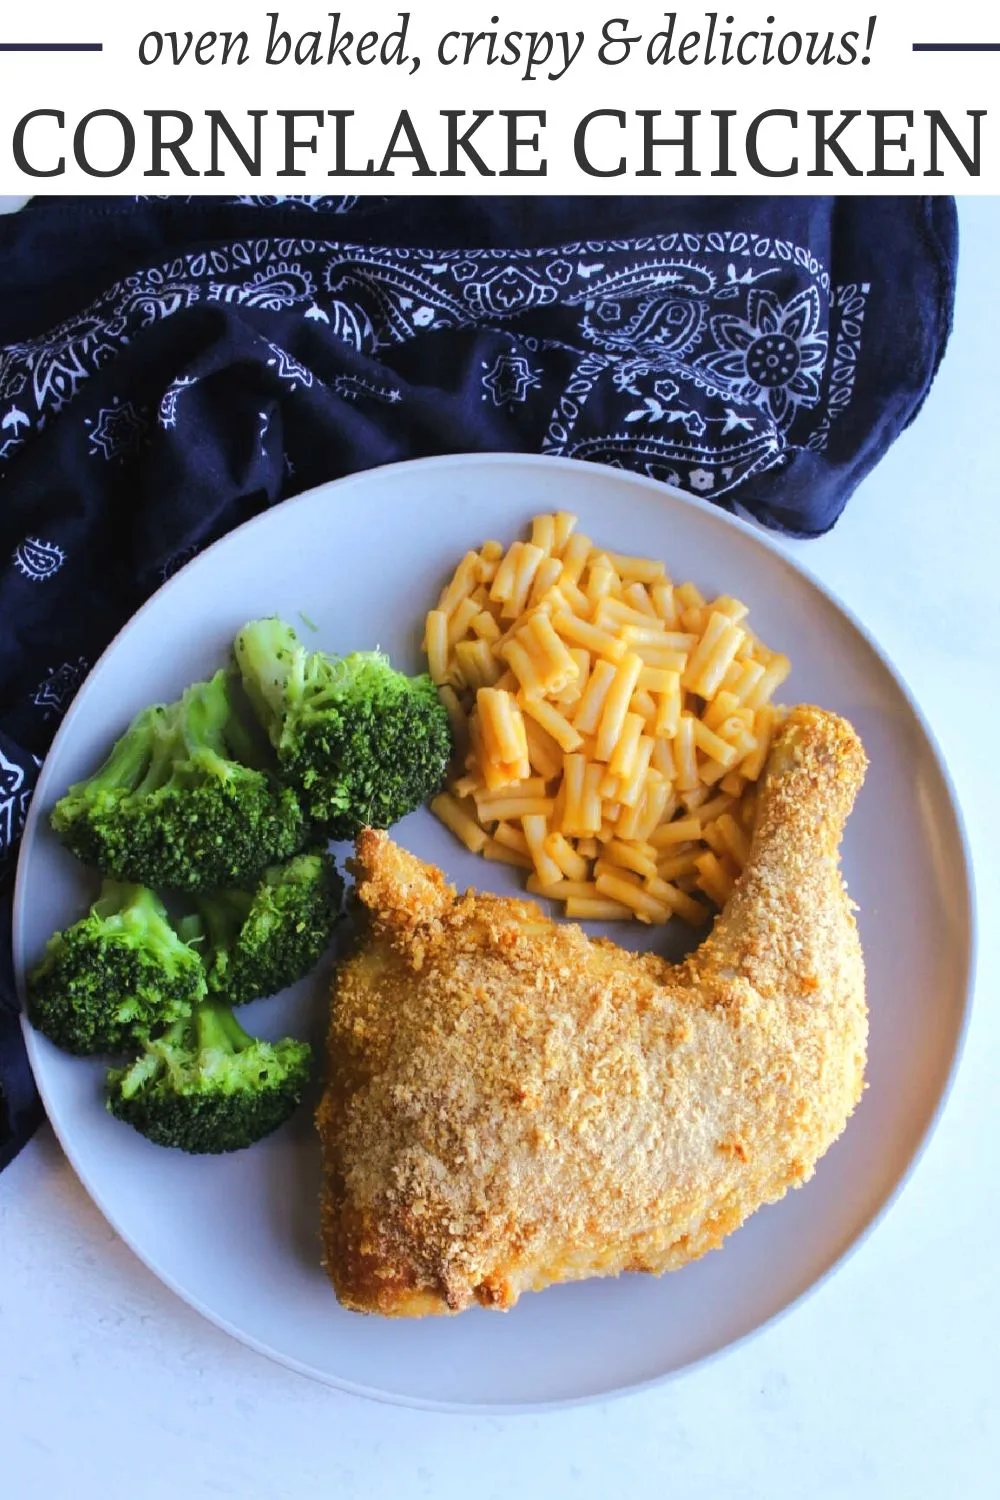 Looking for a delicious way to enjoy fried chicken without all the grease? Try our cornflake crumb chicken! We bake it to crispy perfection on the outside while keeping the meat juicy and tender. It's a classic dinner that our family loves, and we know yours will too. Give it a try tonight!